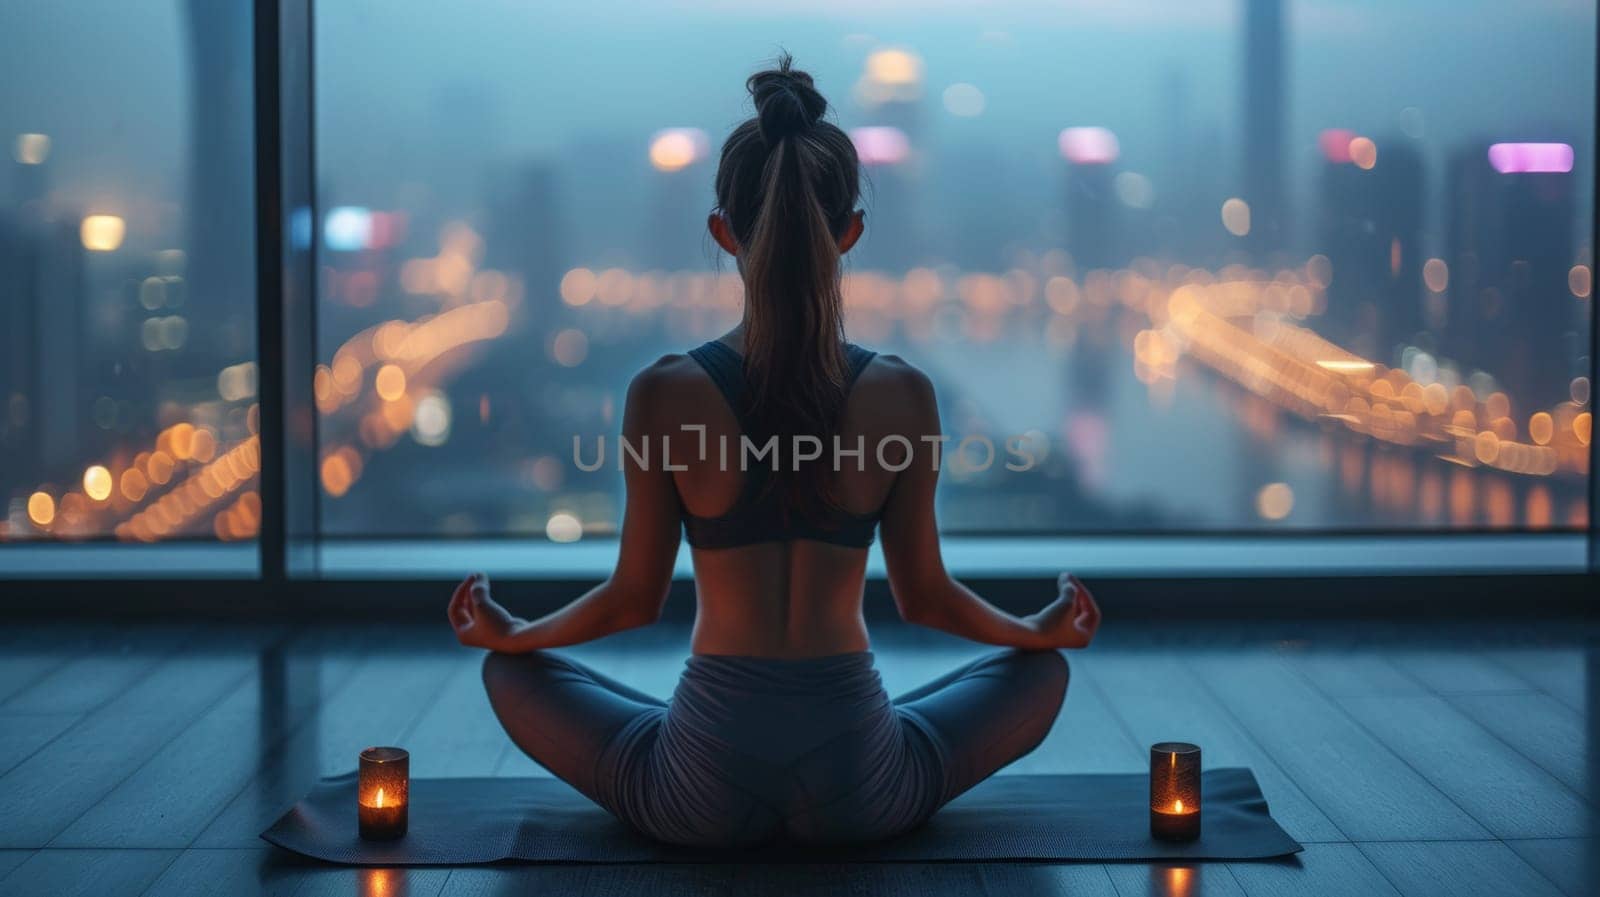 A woman sitting in a lotus position with candles lit, AI by starush